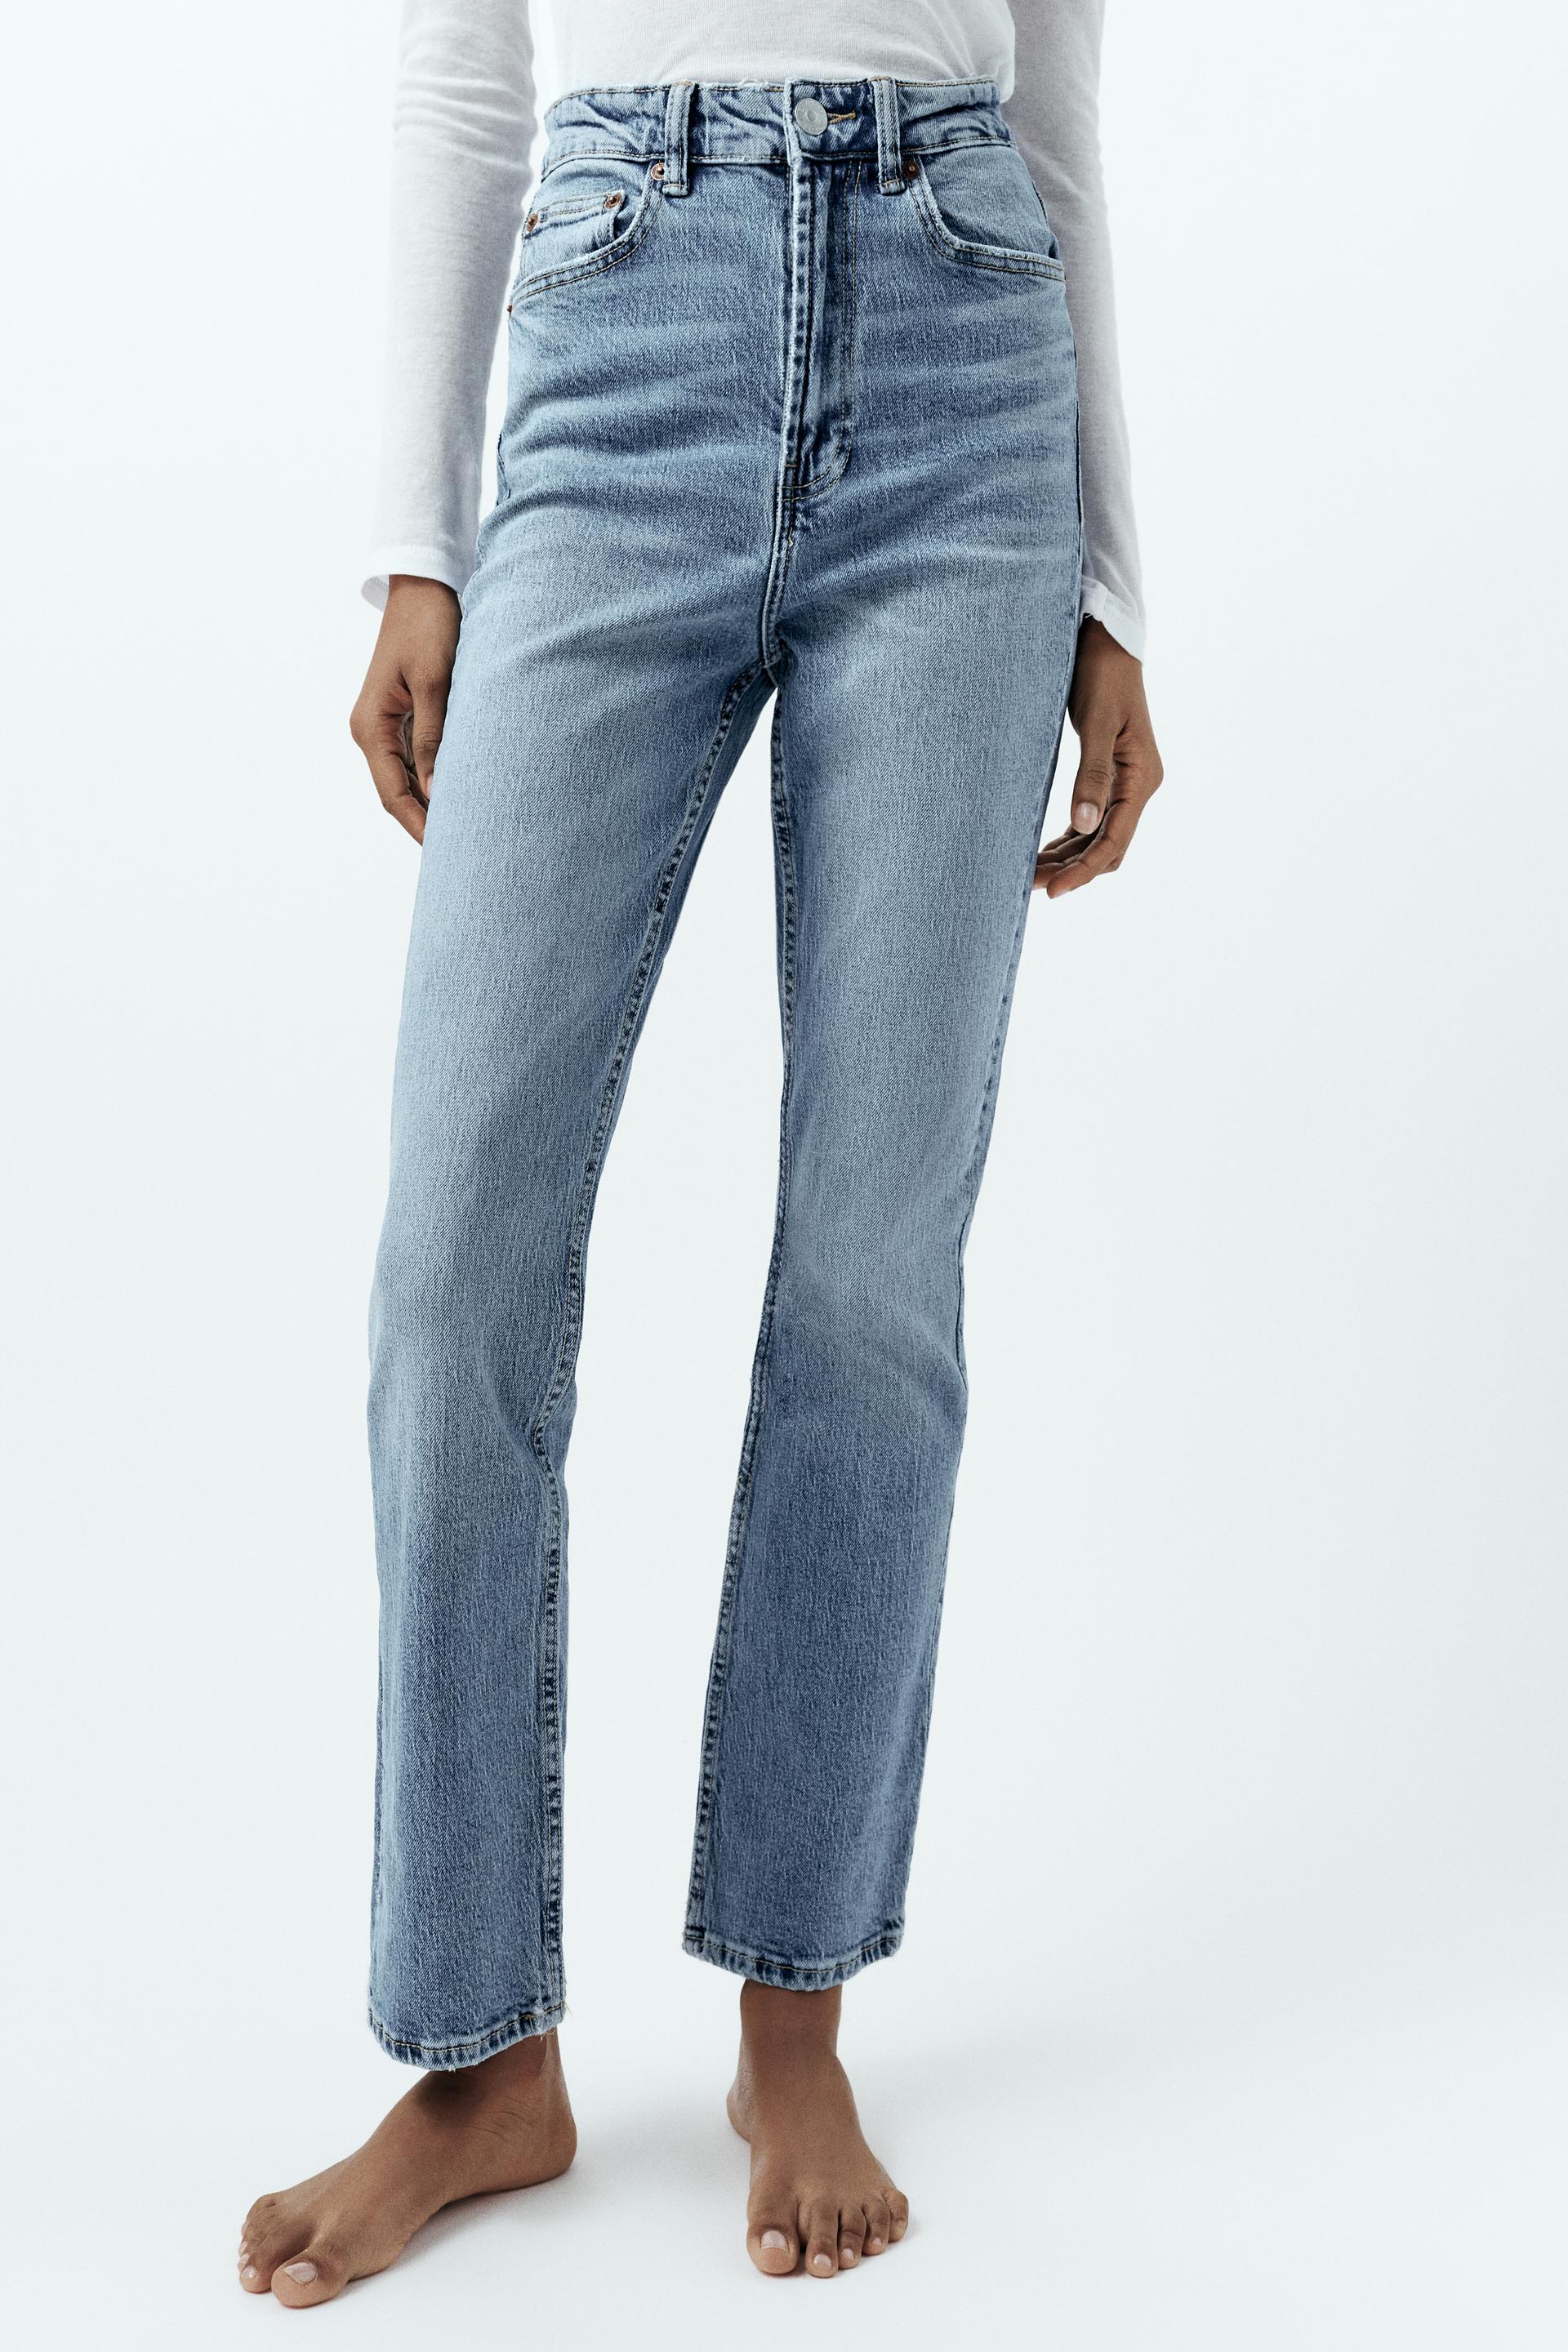 TRF STOVE PIPE JEANS WITH A HIGH WAIST - Blue